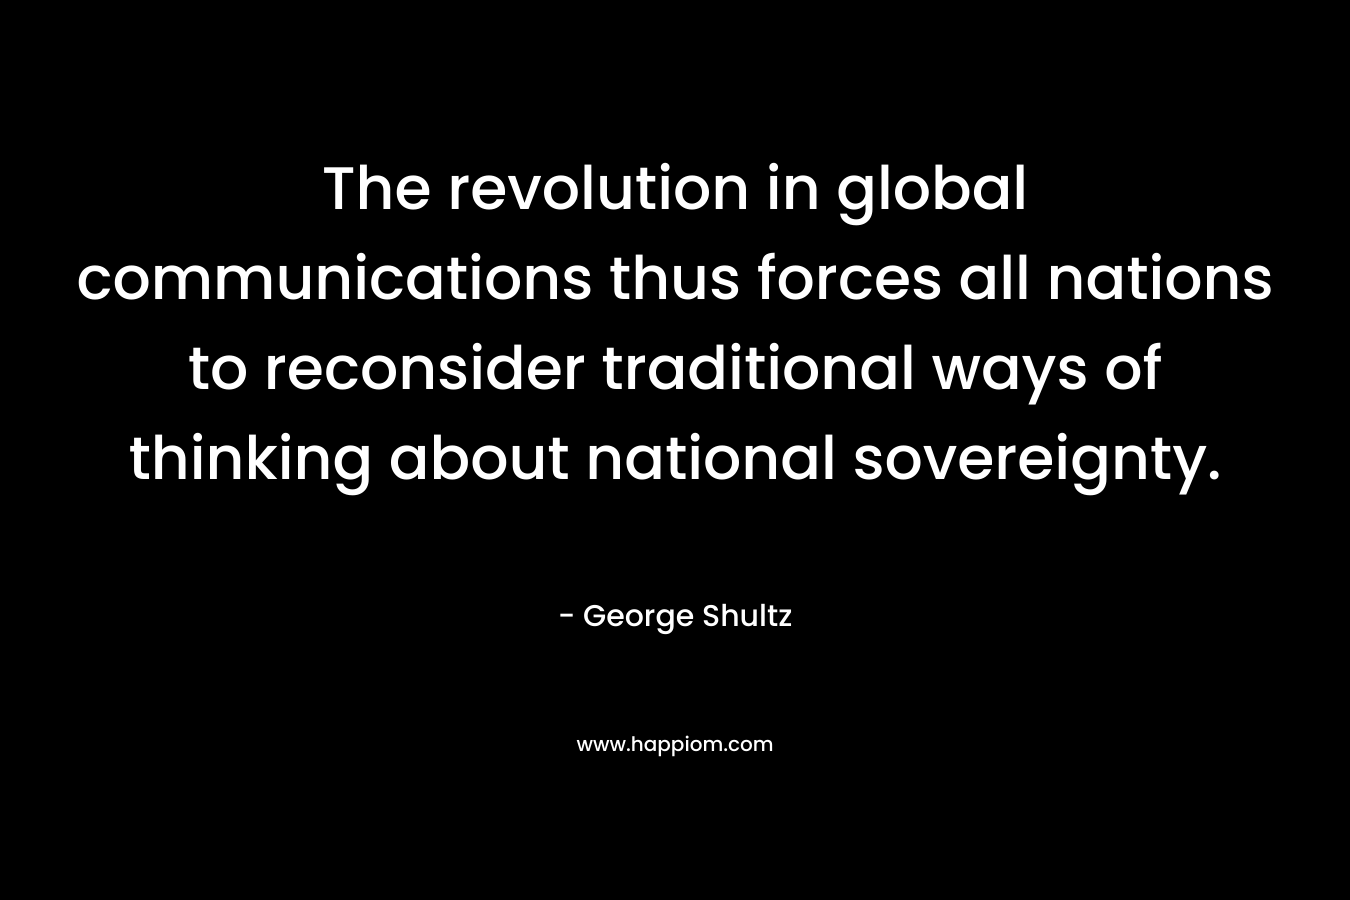 The revolution in global communications thus forces all nations to reconsider traditional ways of thinking about national sovereignty. – George Shultz